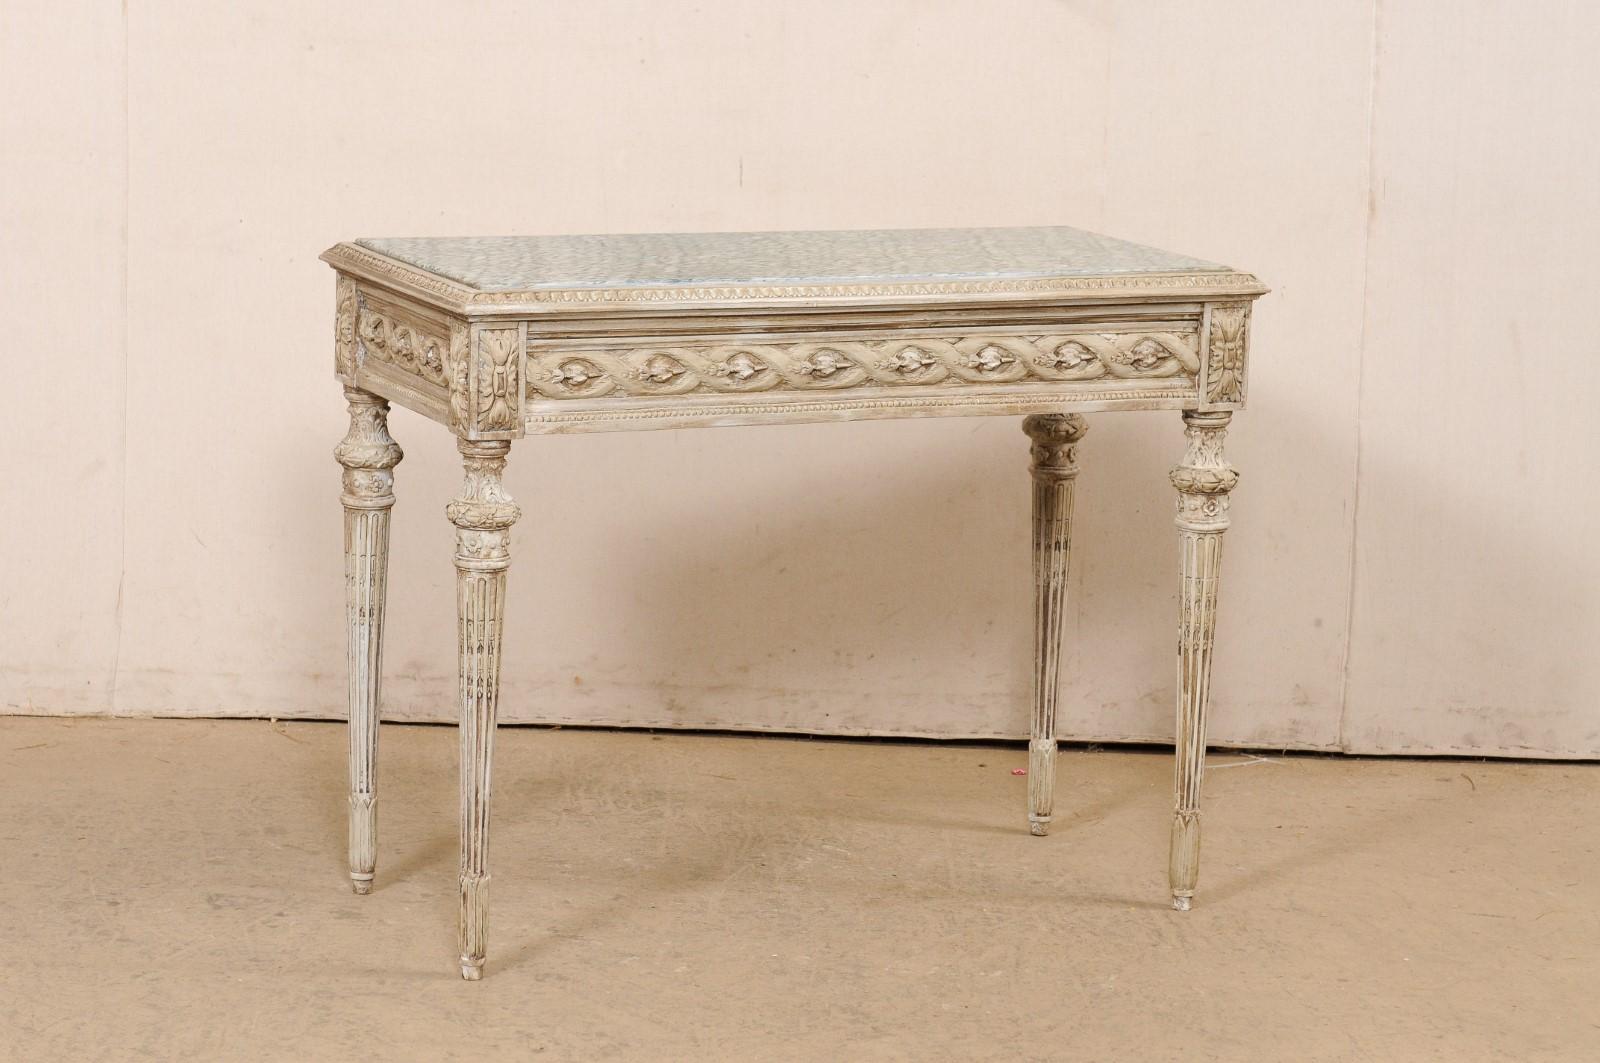 A French carved-wood console table with drawer and marble top. This vintage table from France has a rectangular-shaped top with recessed marble framed within a lamb's tongue carved edging. The apron, which is magnificently carved in a floral